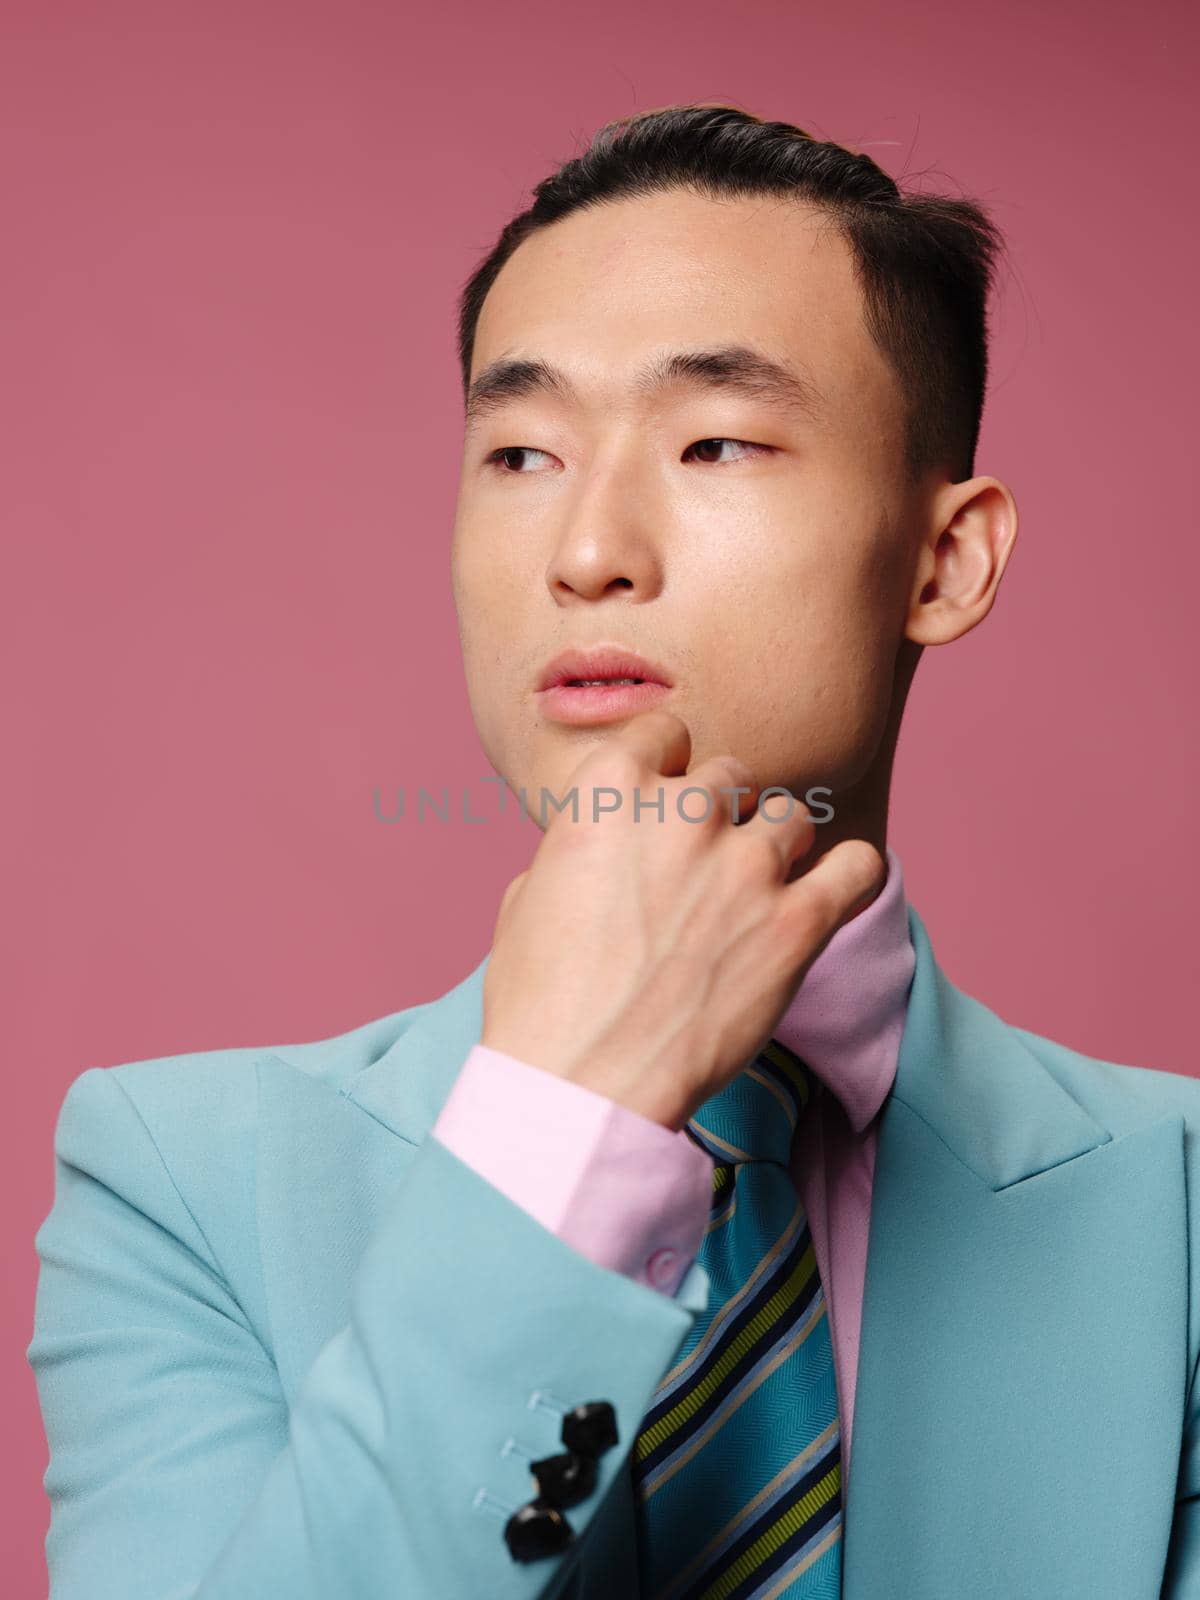 Man asian appearance close-up blue suit pink background emotions. High quality photo